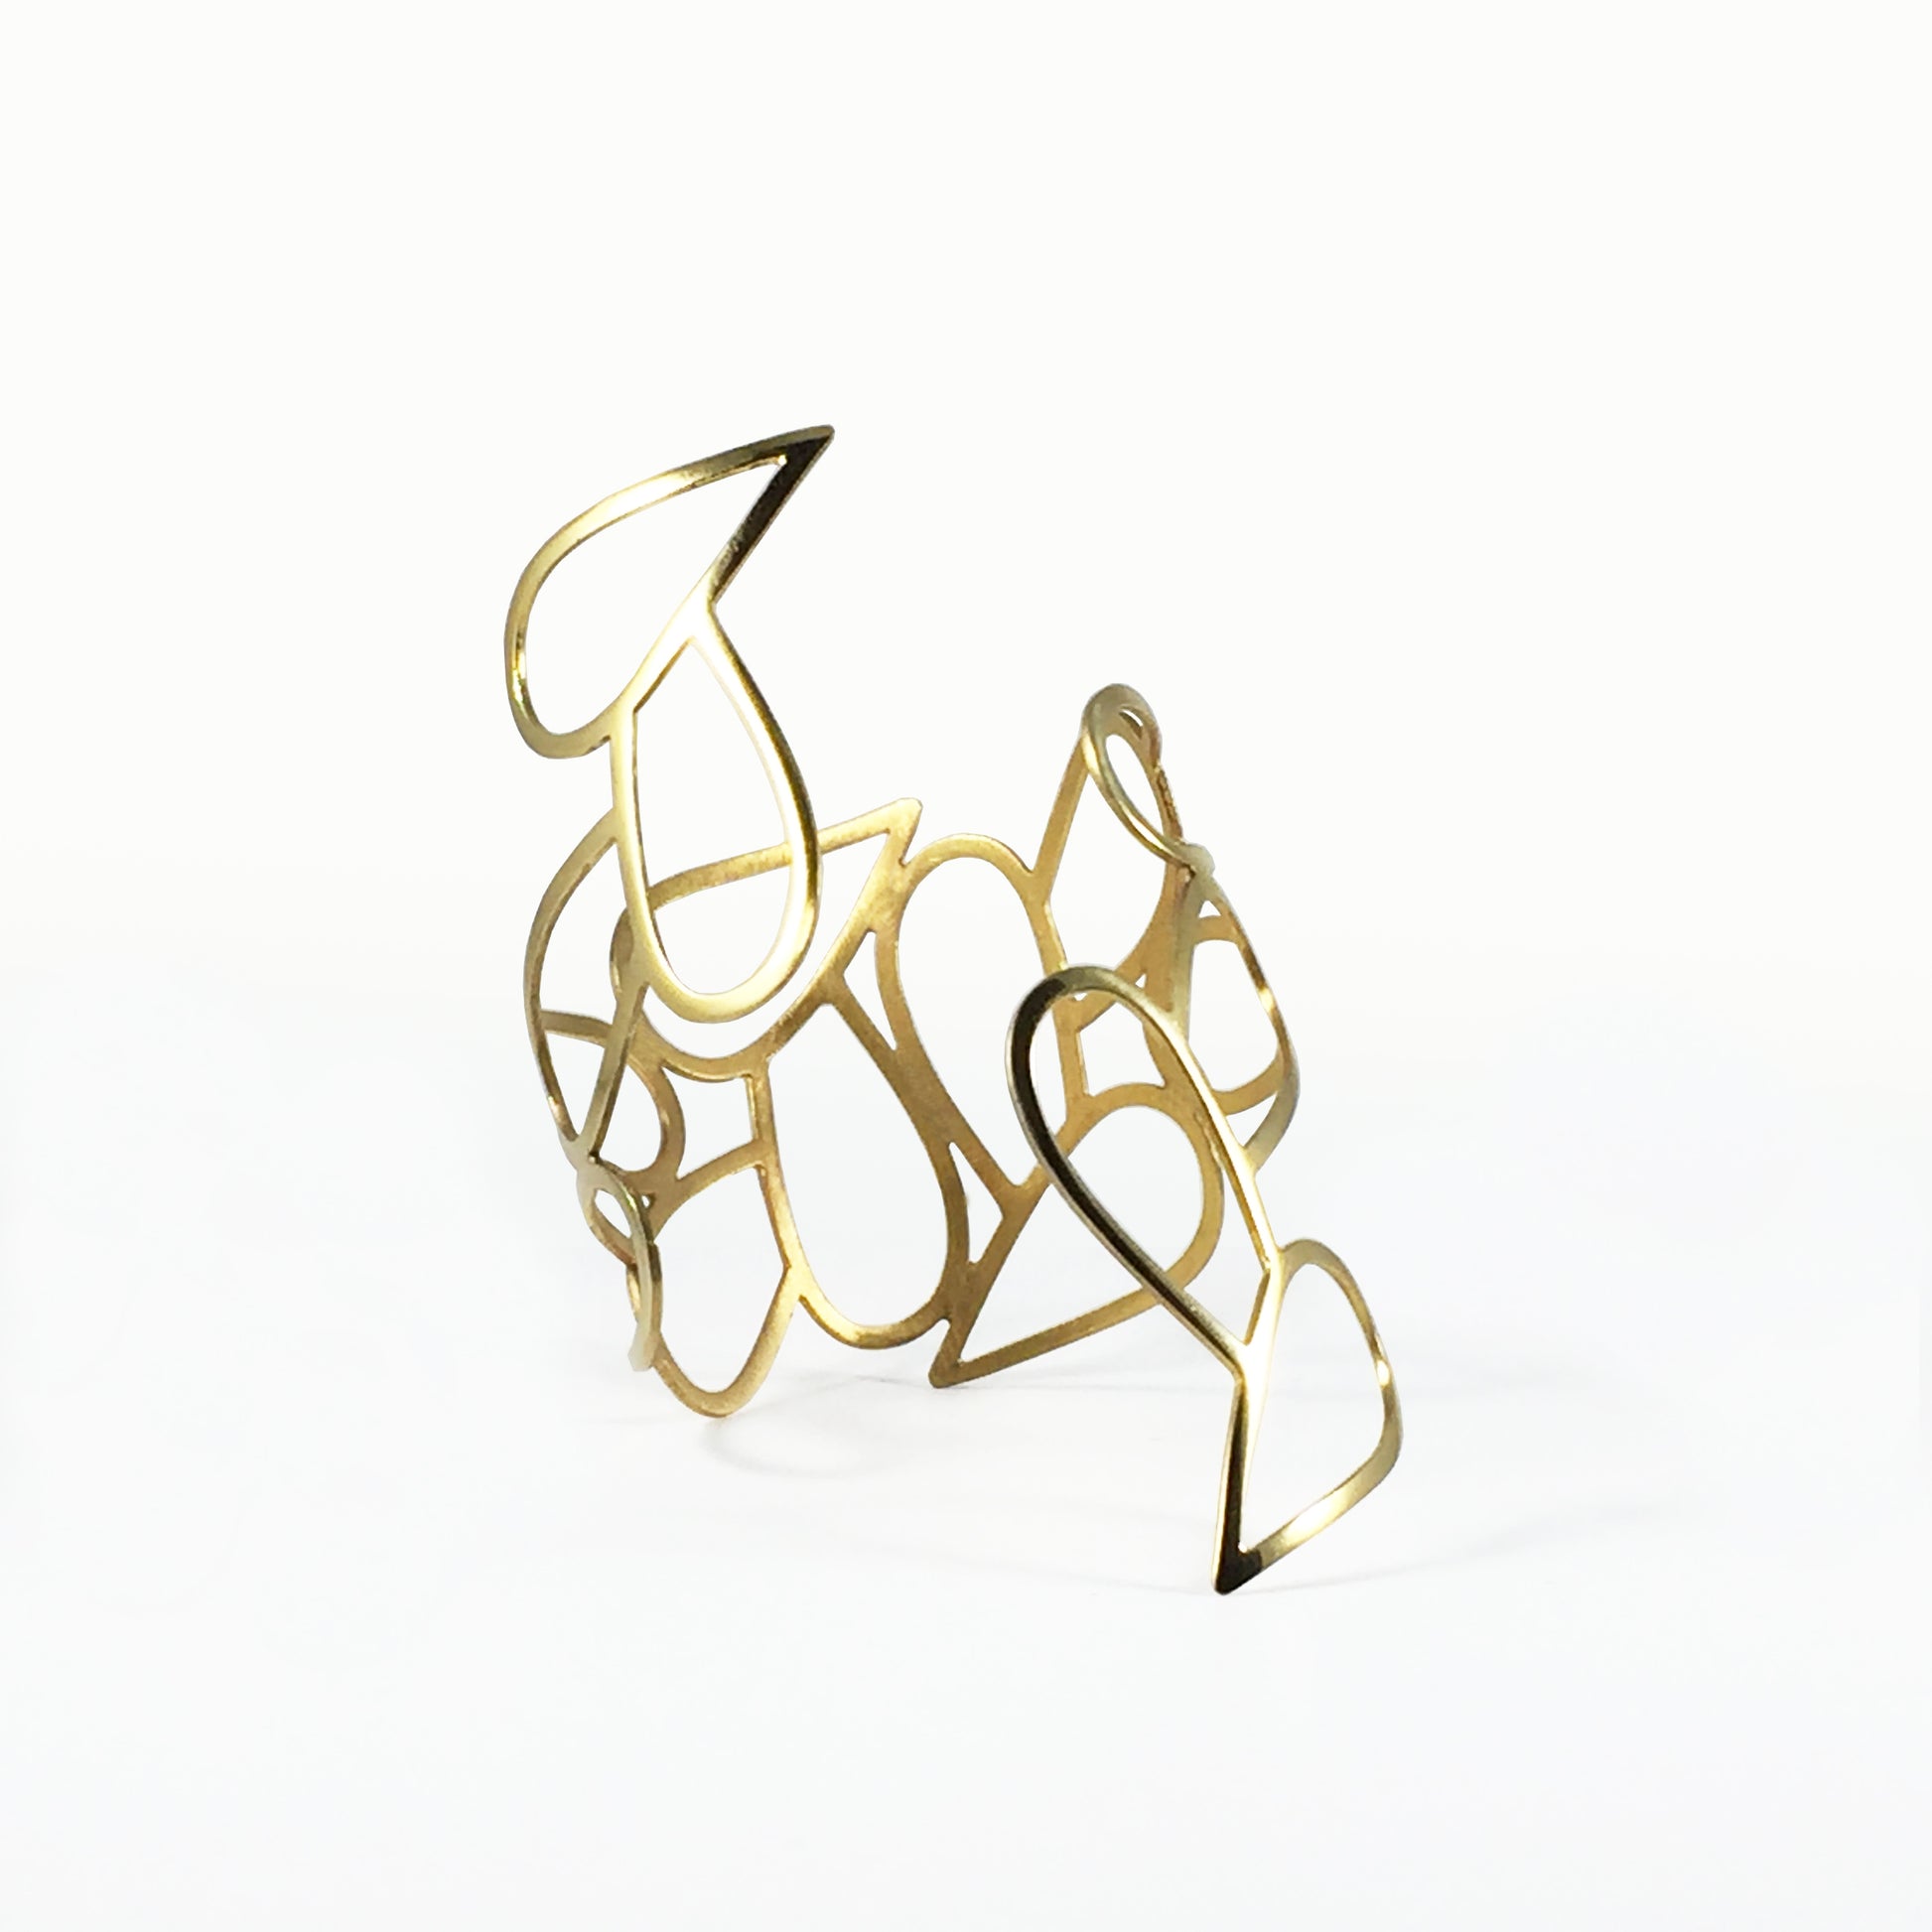 Helena Collection bring the beauty of the ancient Greek world to the contemporary woman. All pieces are cut bent polished and personally handcrafted by Laura. Laura’s collections reflect her love of architecture organic and natural shapes simplicity subtlety sensuality exclusive designs synthesized in every piece.